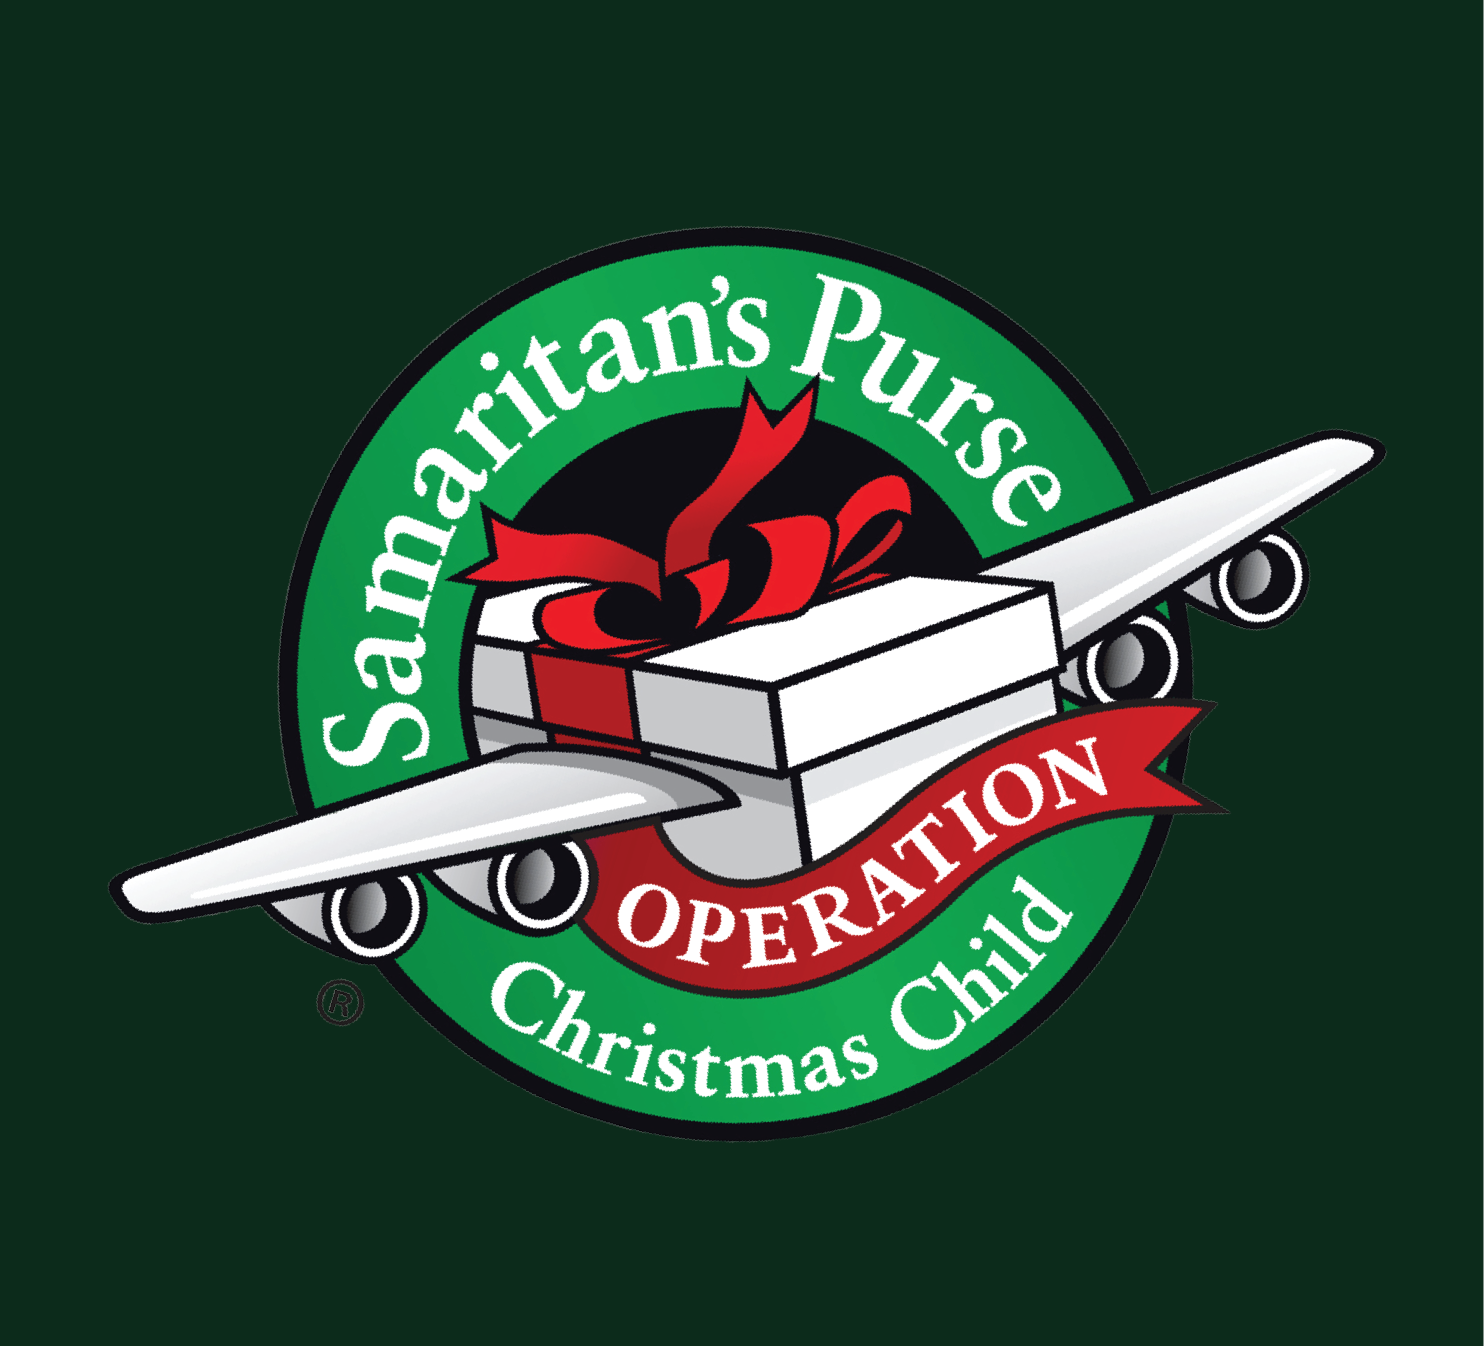 Liberty Collects 4,000 Shoe Boxes For Operation Christmas Child The